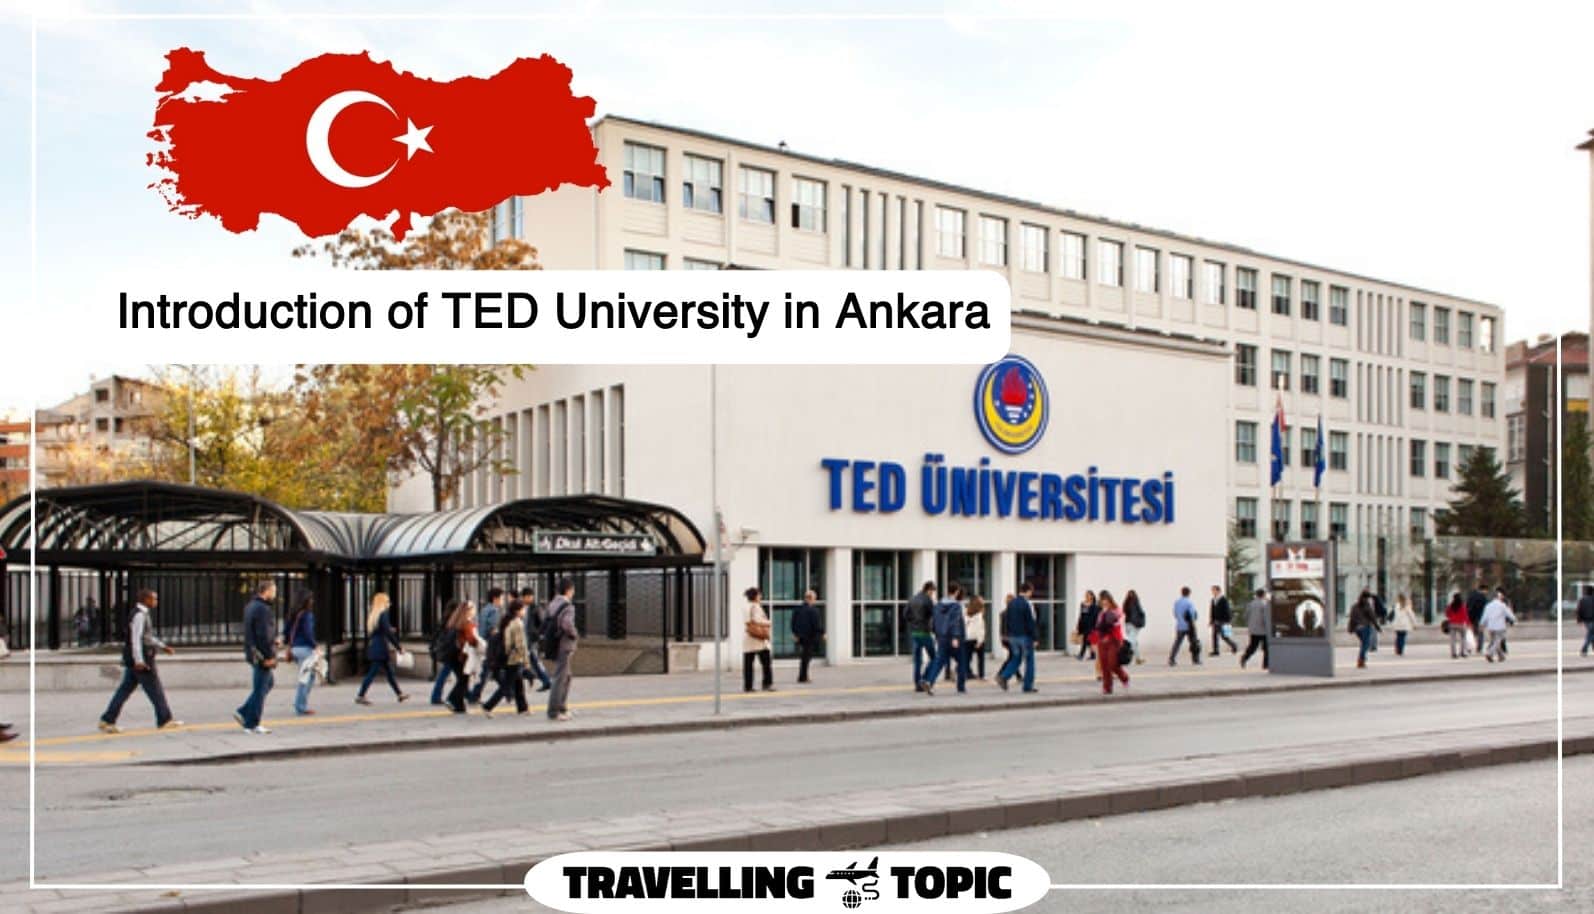 Introduction of TED University in Ankara